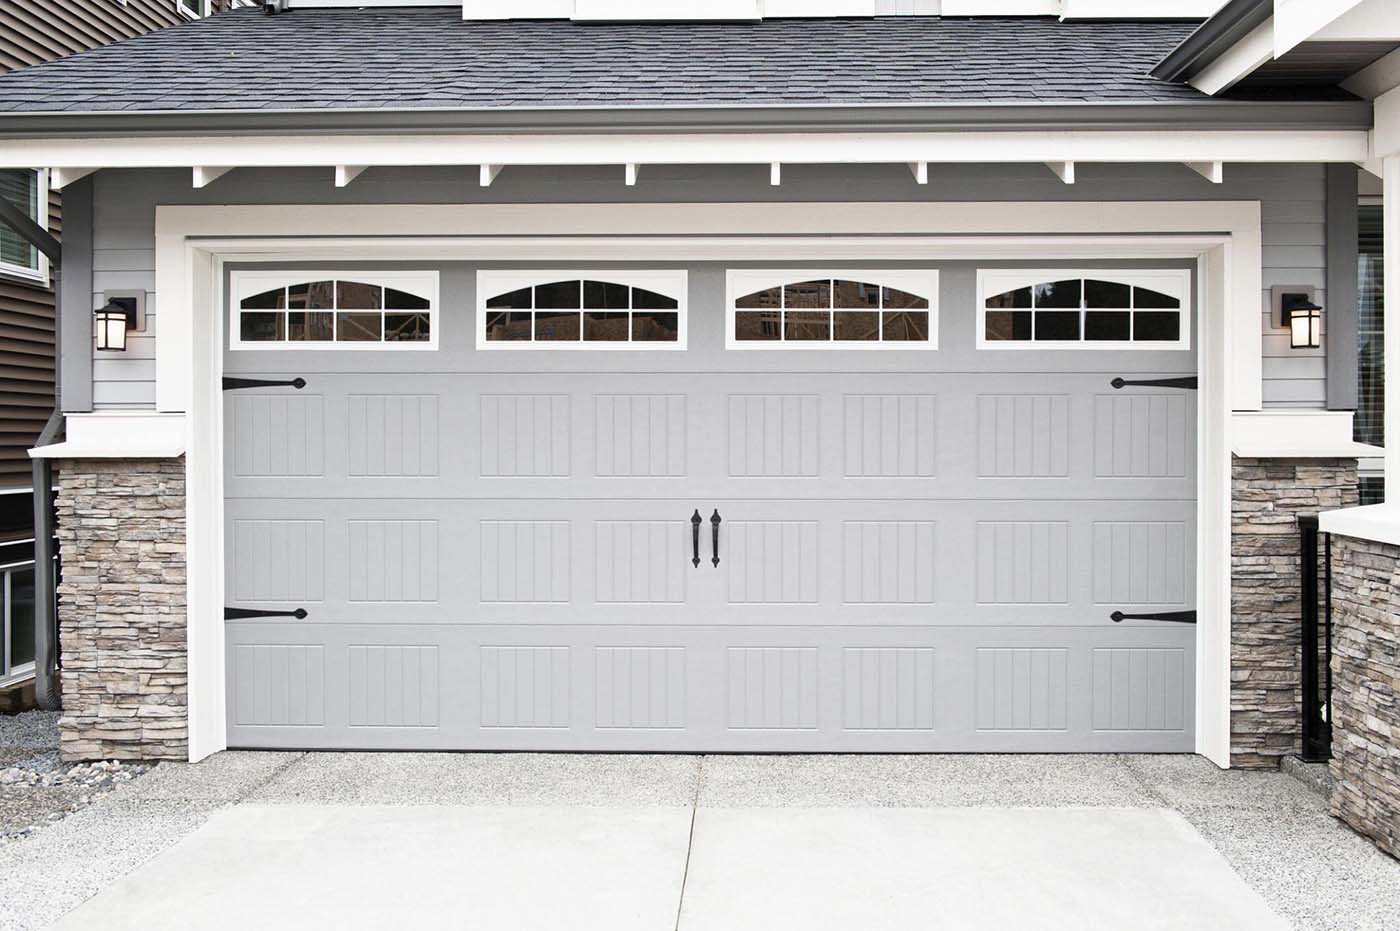 Garage Doors: Choosing the Right Type for Convenience